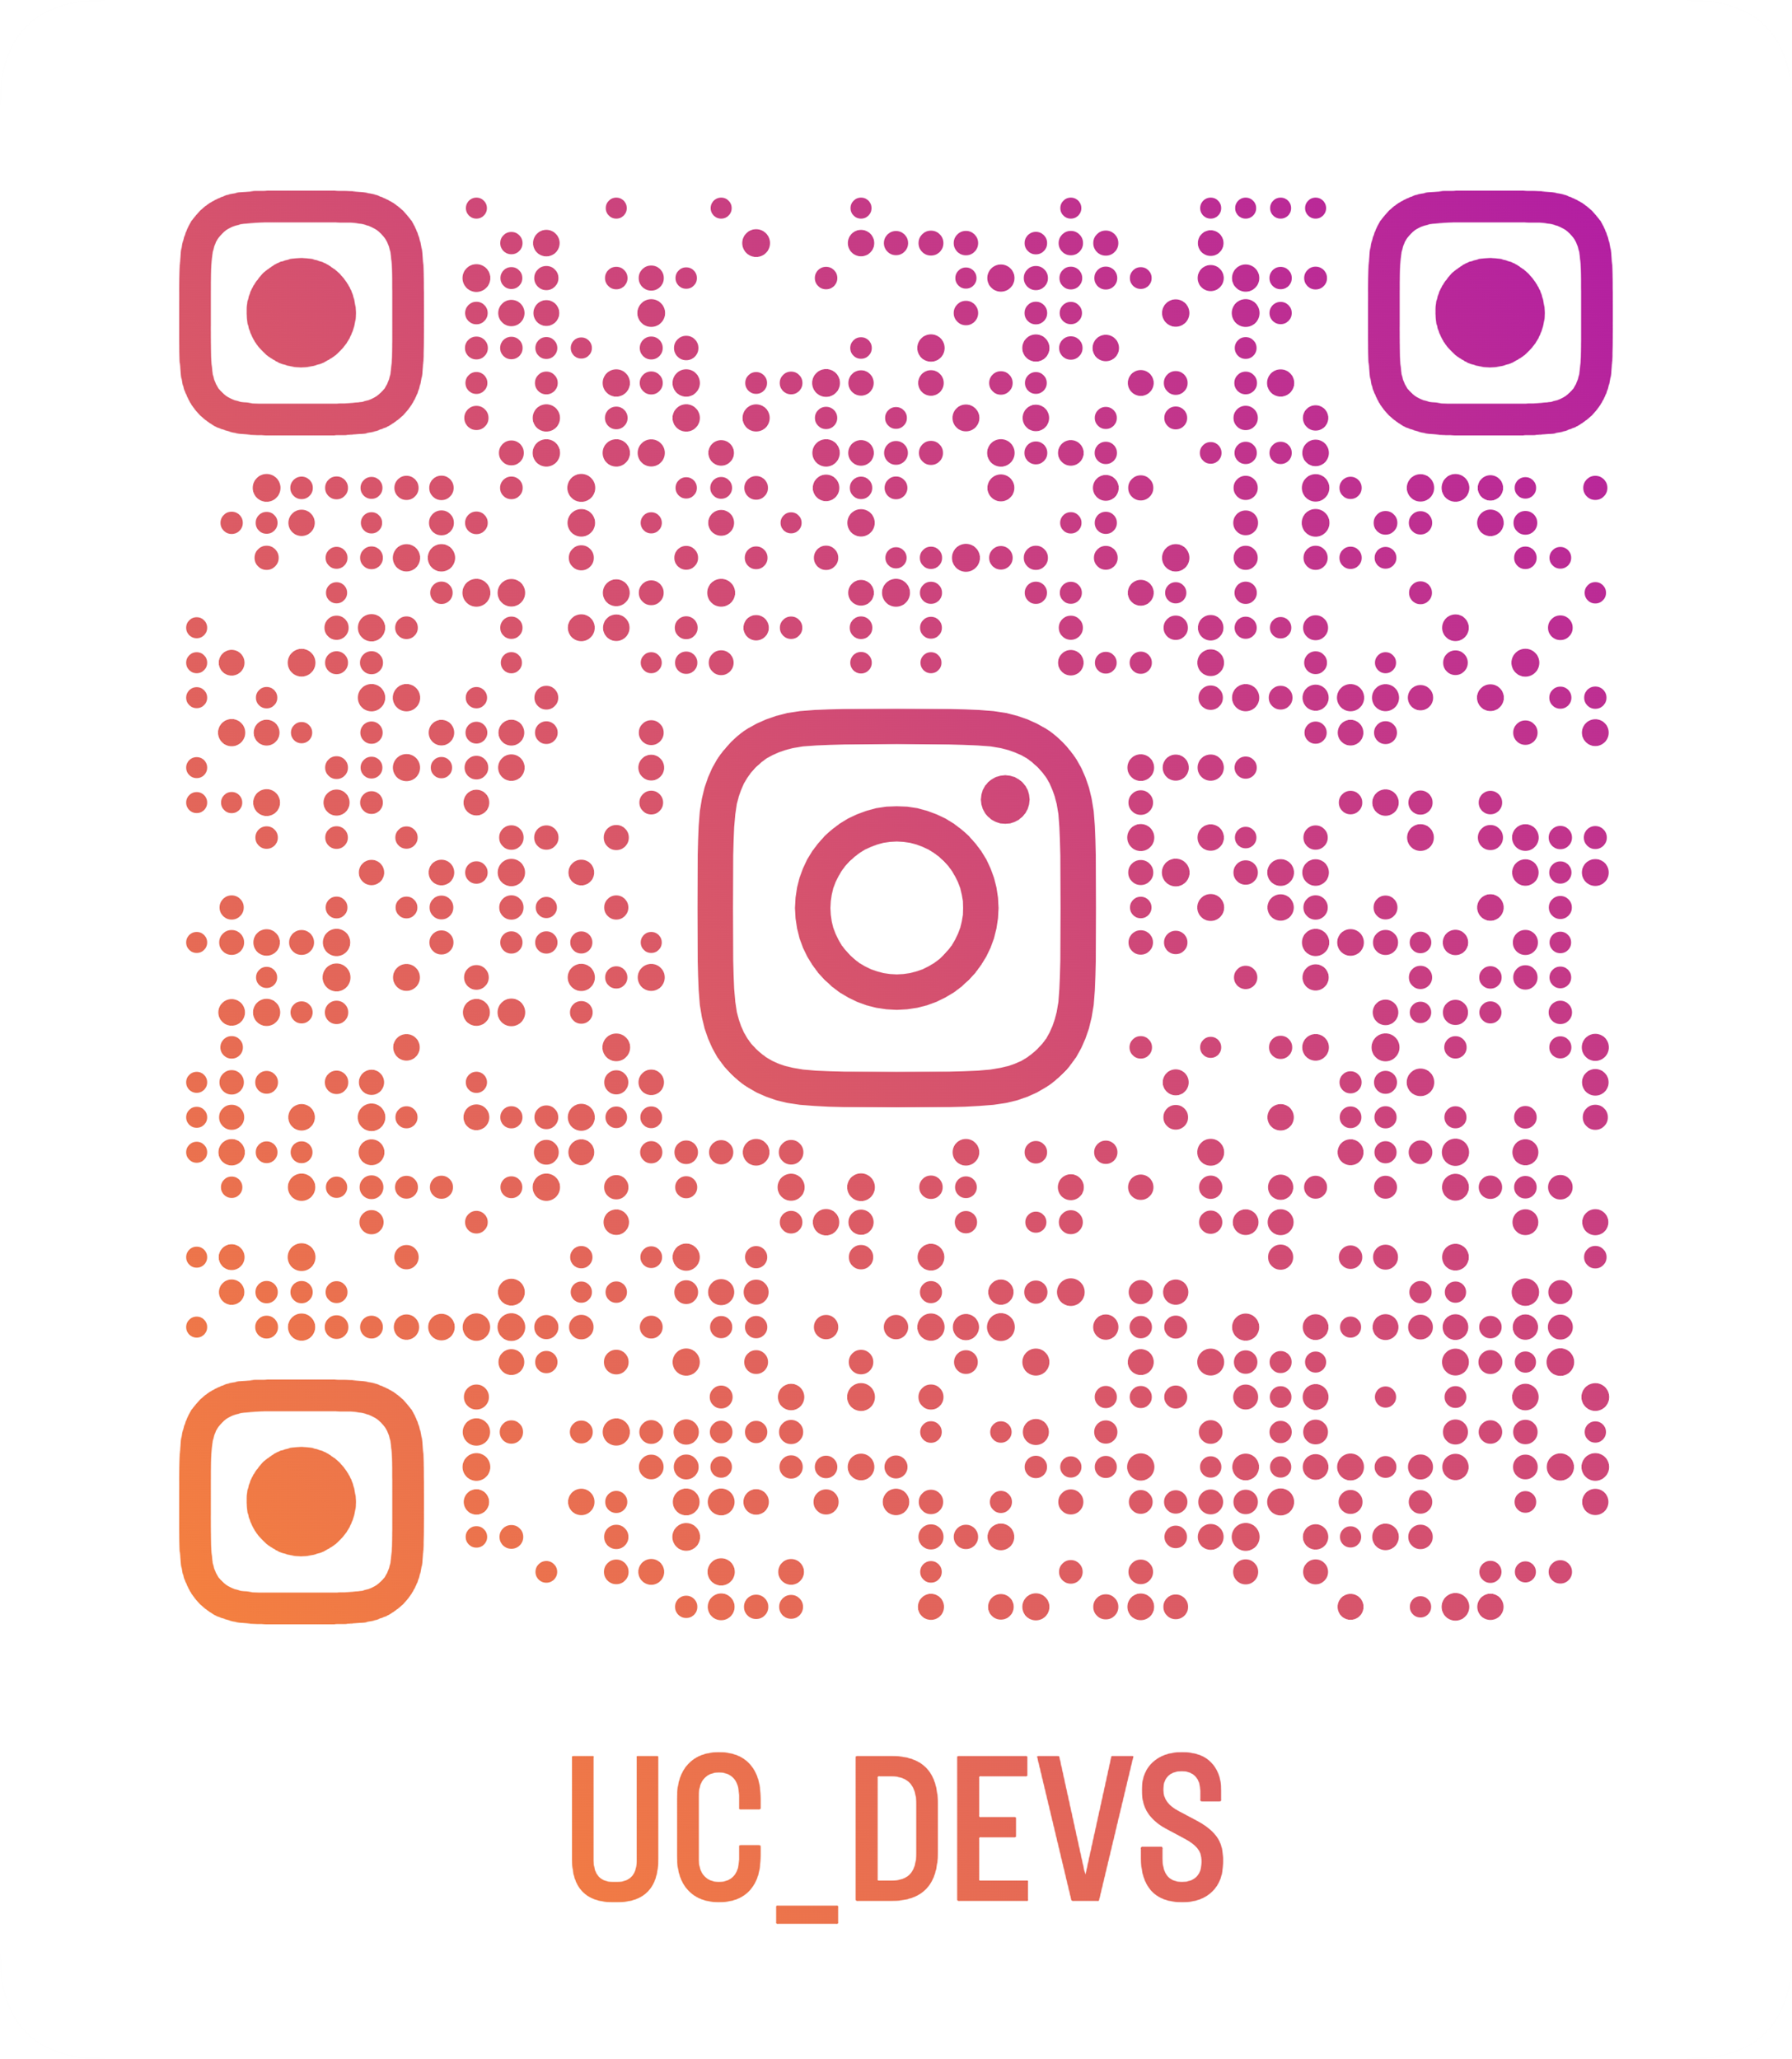 This is the barcode link to the UC DEVS Instagram account.